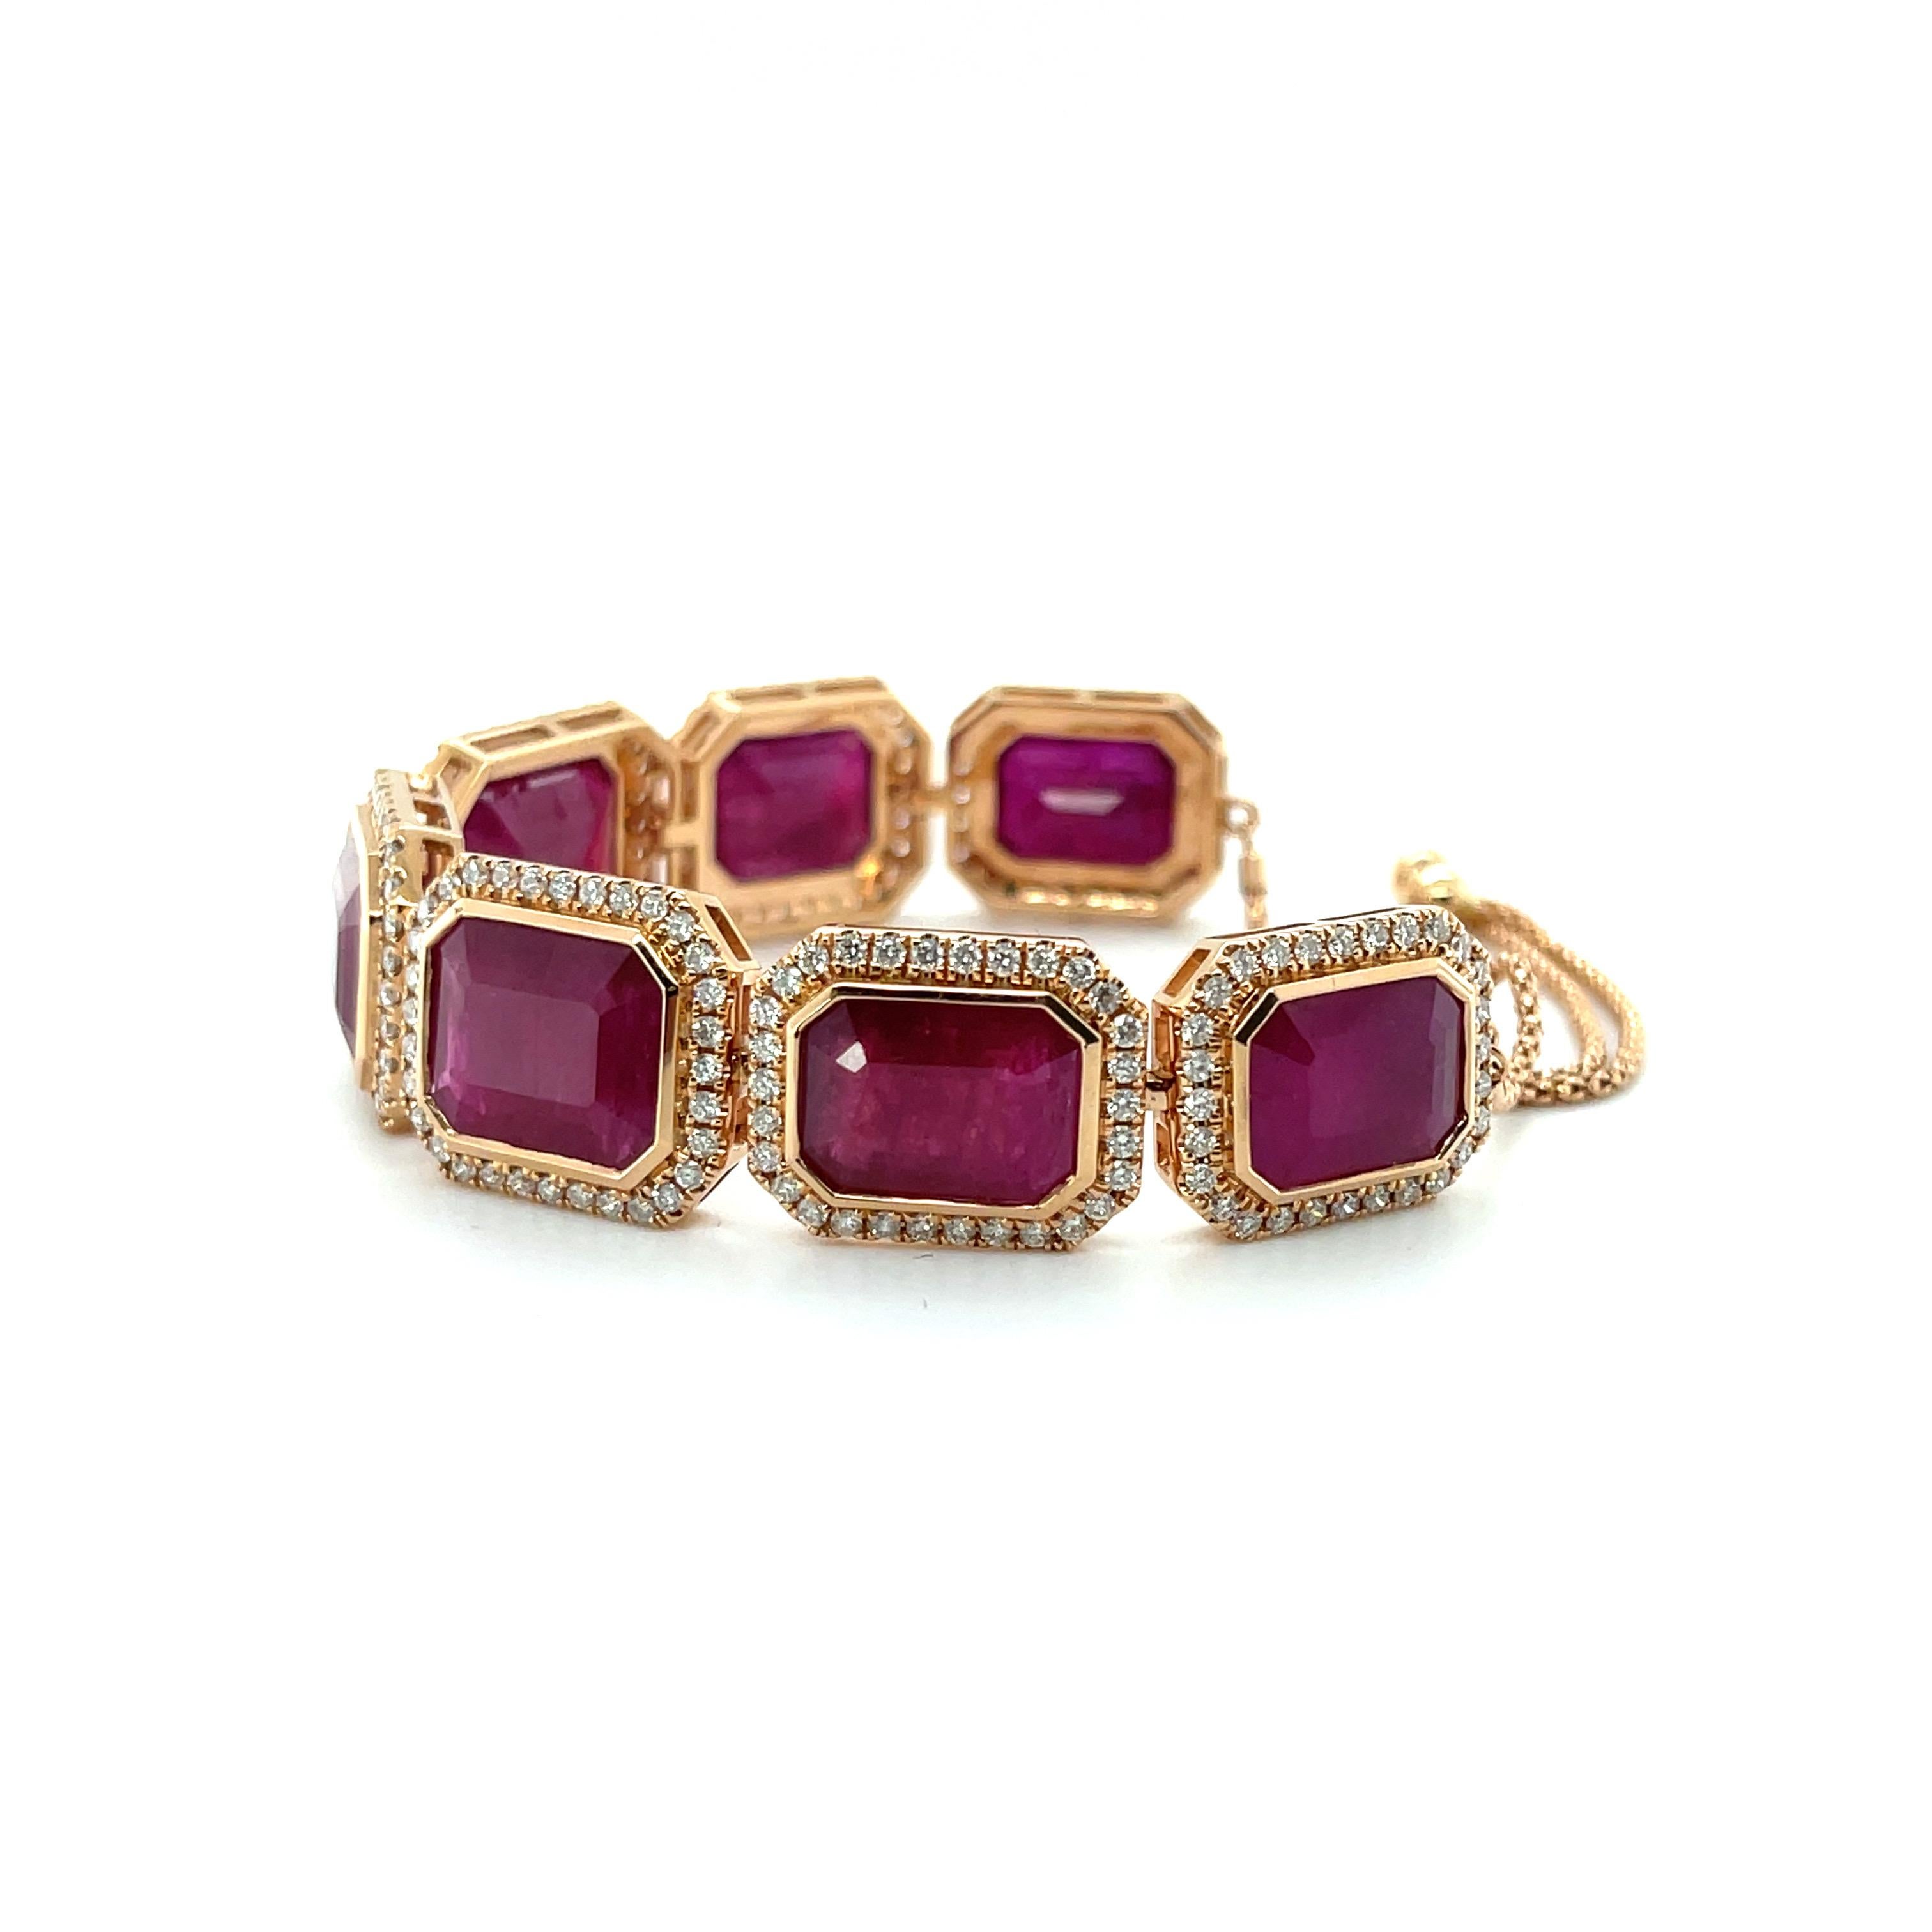 Natural ruby and diamonds, beautifully crafted in eighteen karat rose gold, complimented by a stunning polished finish design.

 One ladies - 18ct rose gold bracelet, polished finish, with safety chain. The item contains:
Seven rub over set emerald